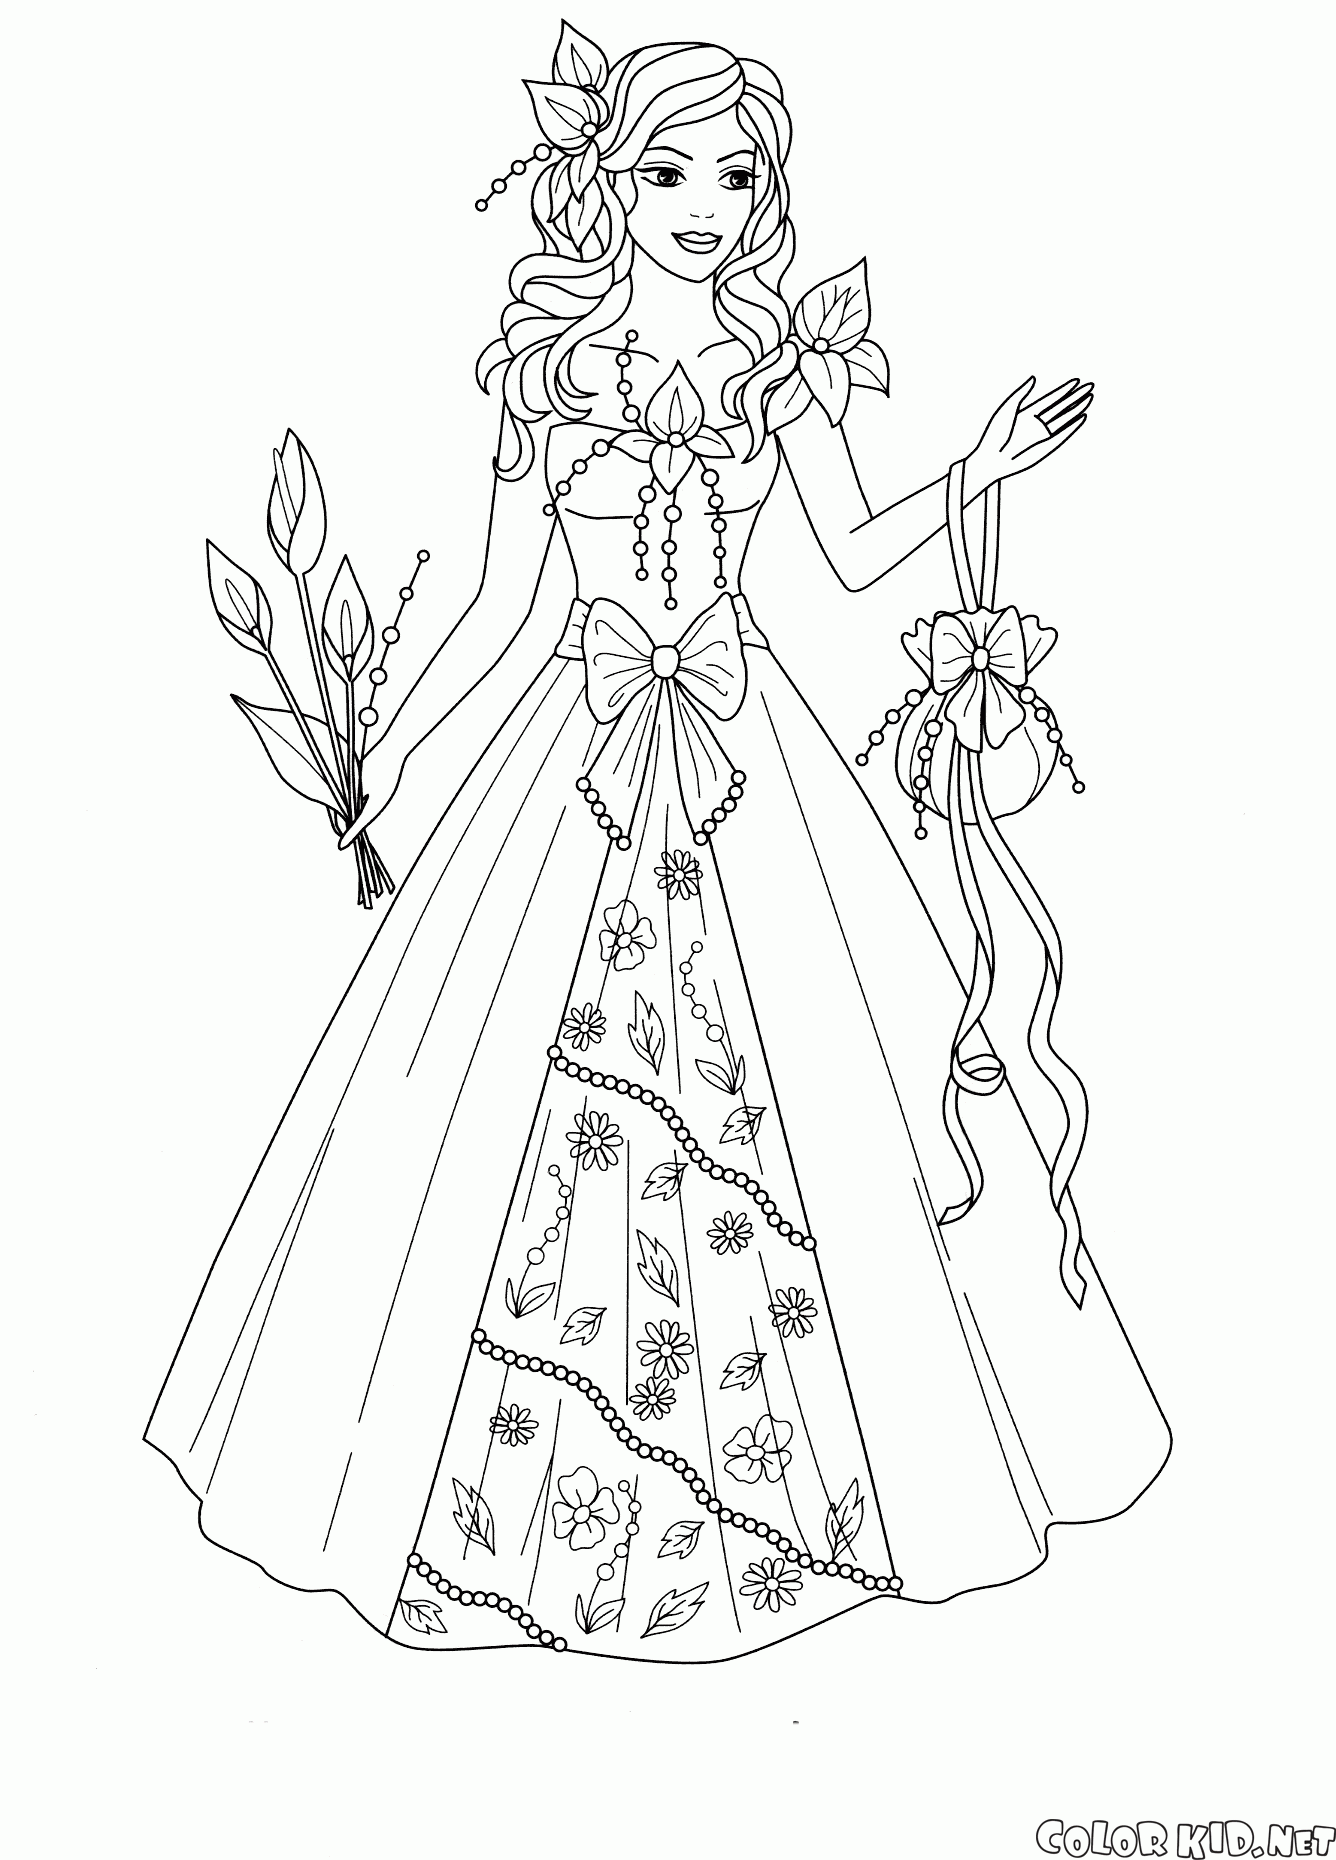 The princess of the kingdom of flowers